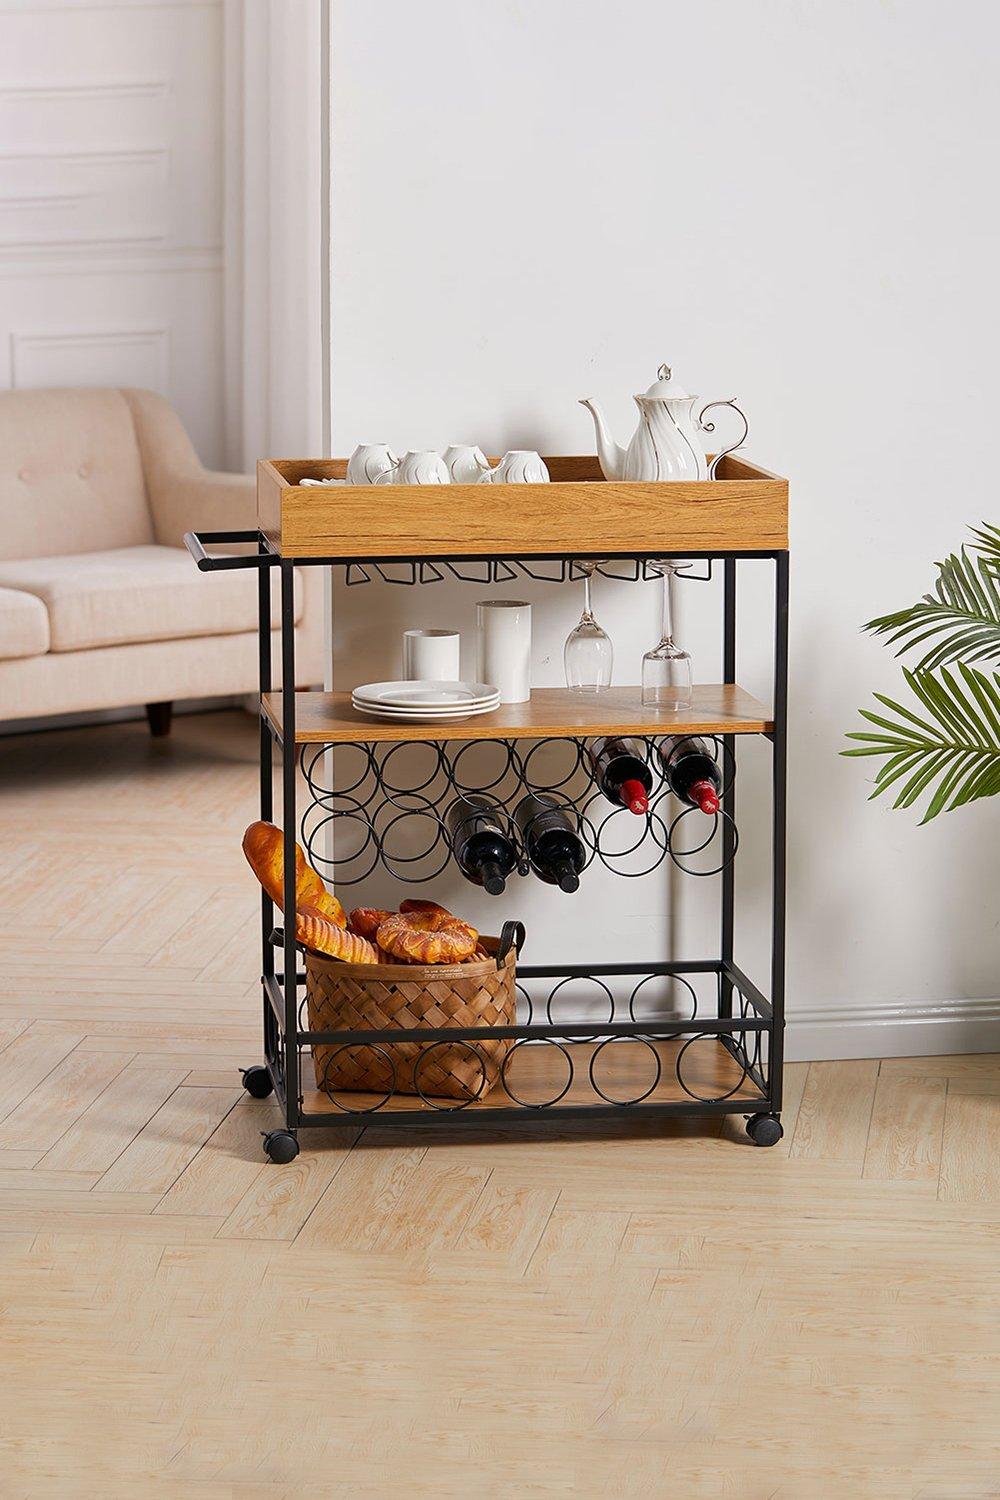 81x40x94cm Metallic Rolling Serving Bar Cart with Wine Rack and Glass Cup Holder